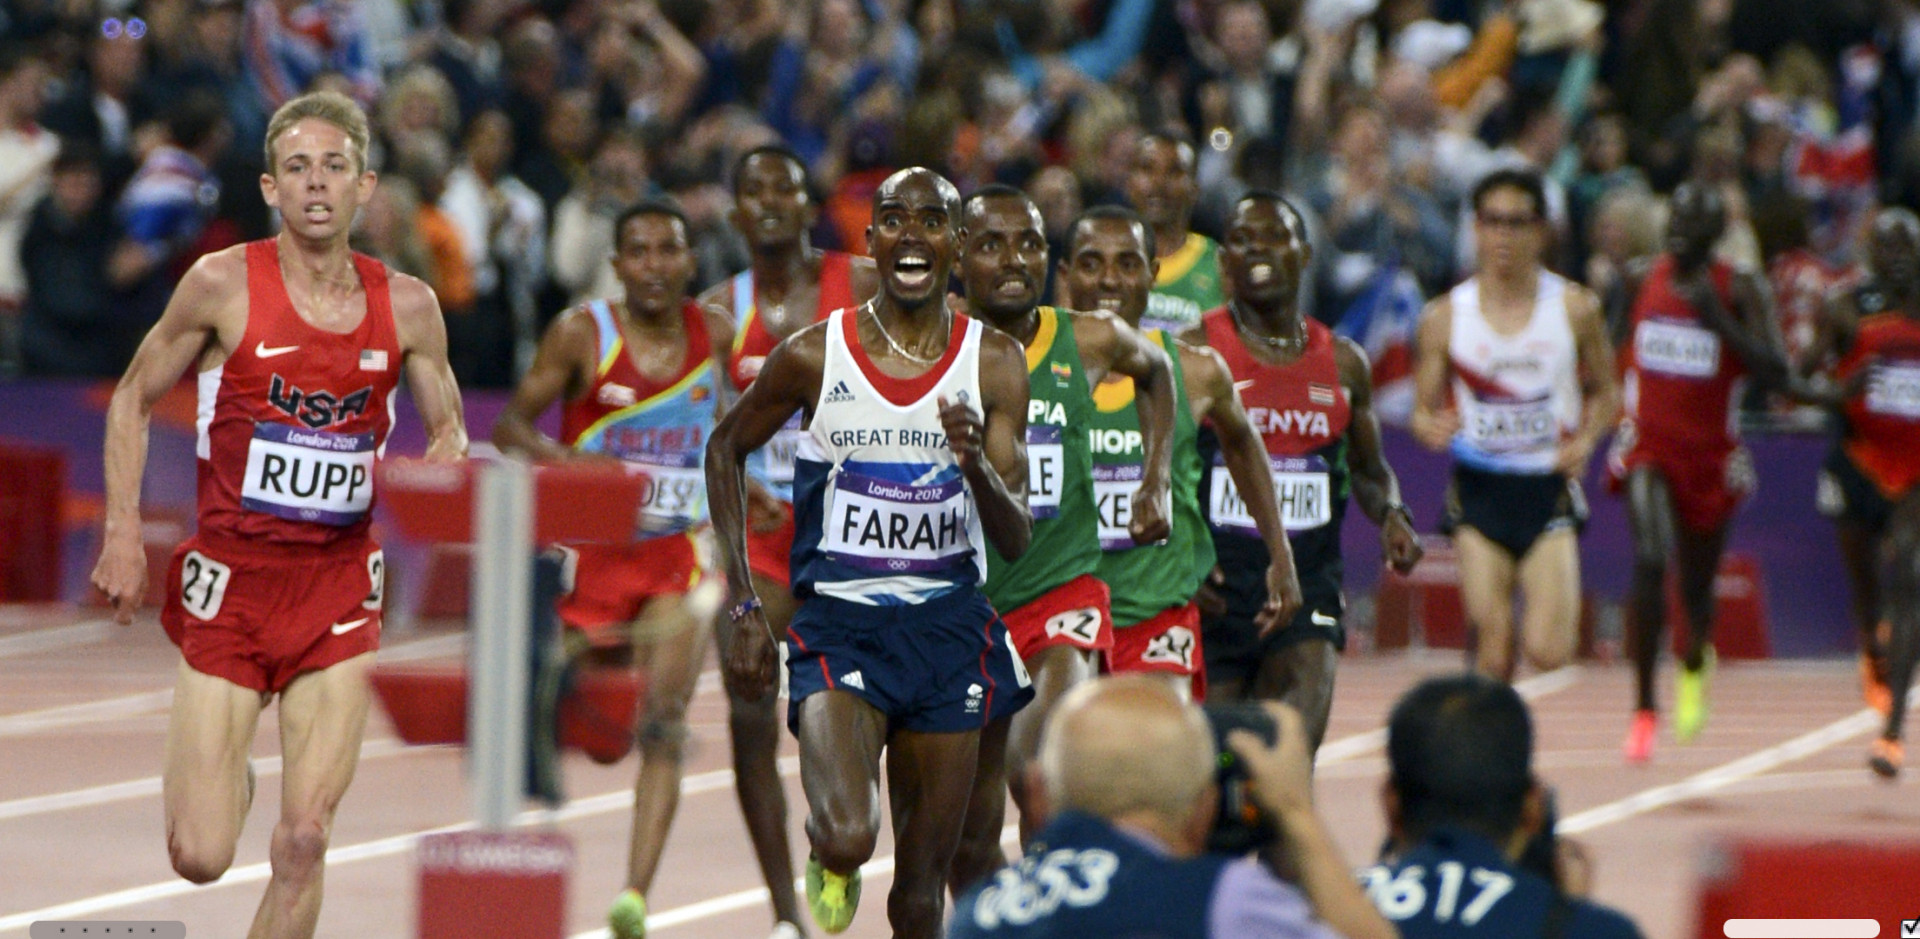 Mo Farah of Great Britain winning the 10,000 Meters at the London Olympics : Olympics : Photography by Adam Stoltman: Sports Photography, The Arts, Portraiture, Travel, Photojournalism and Fine Art in New York